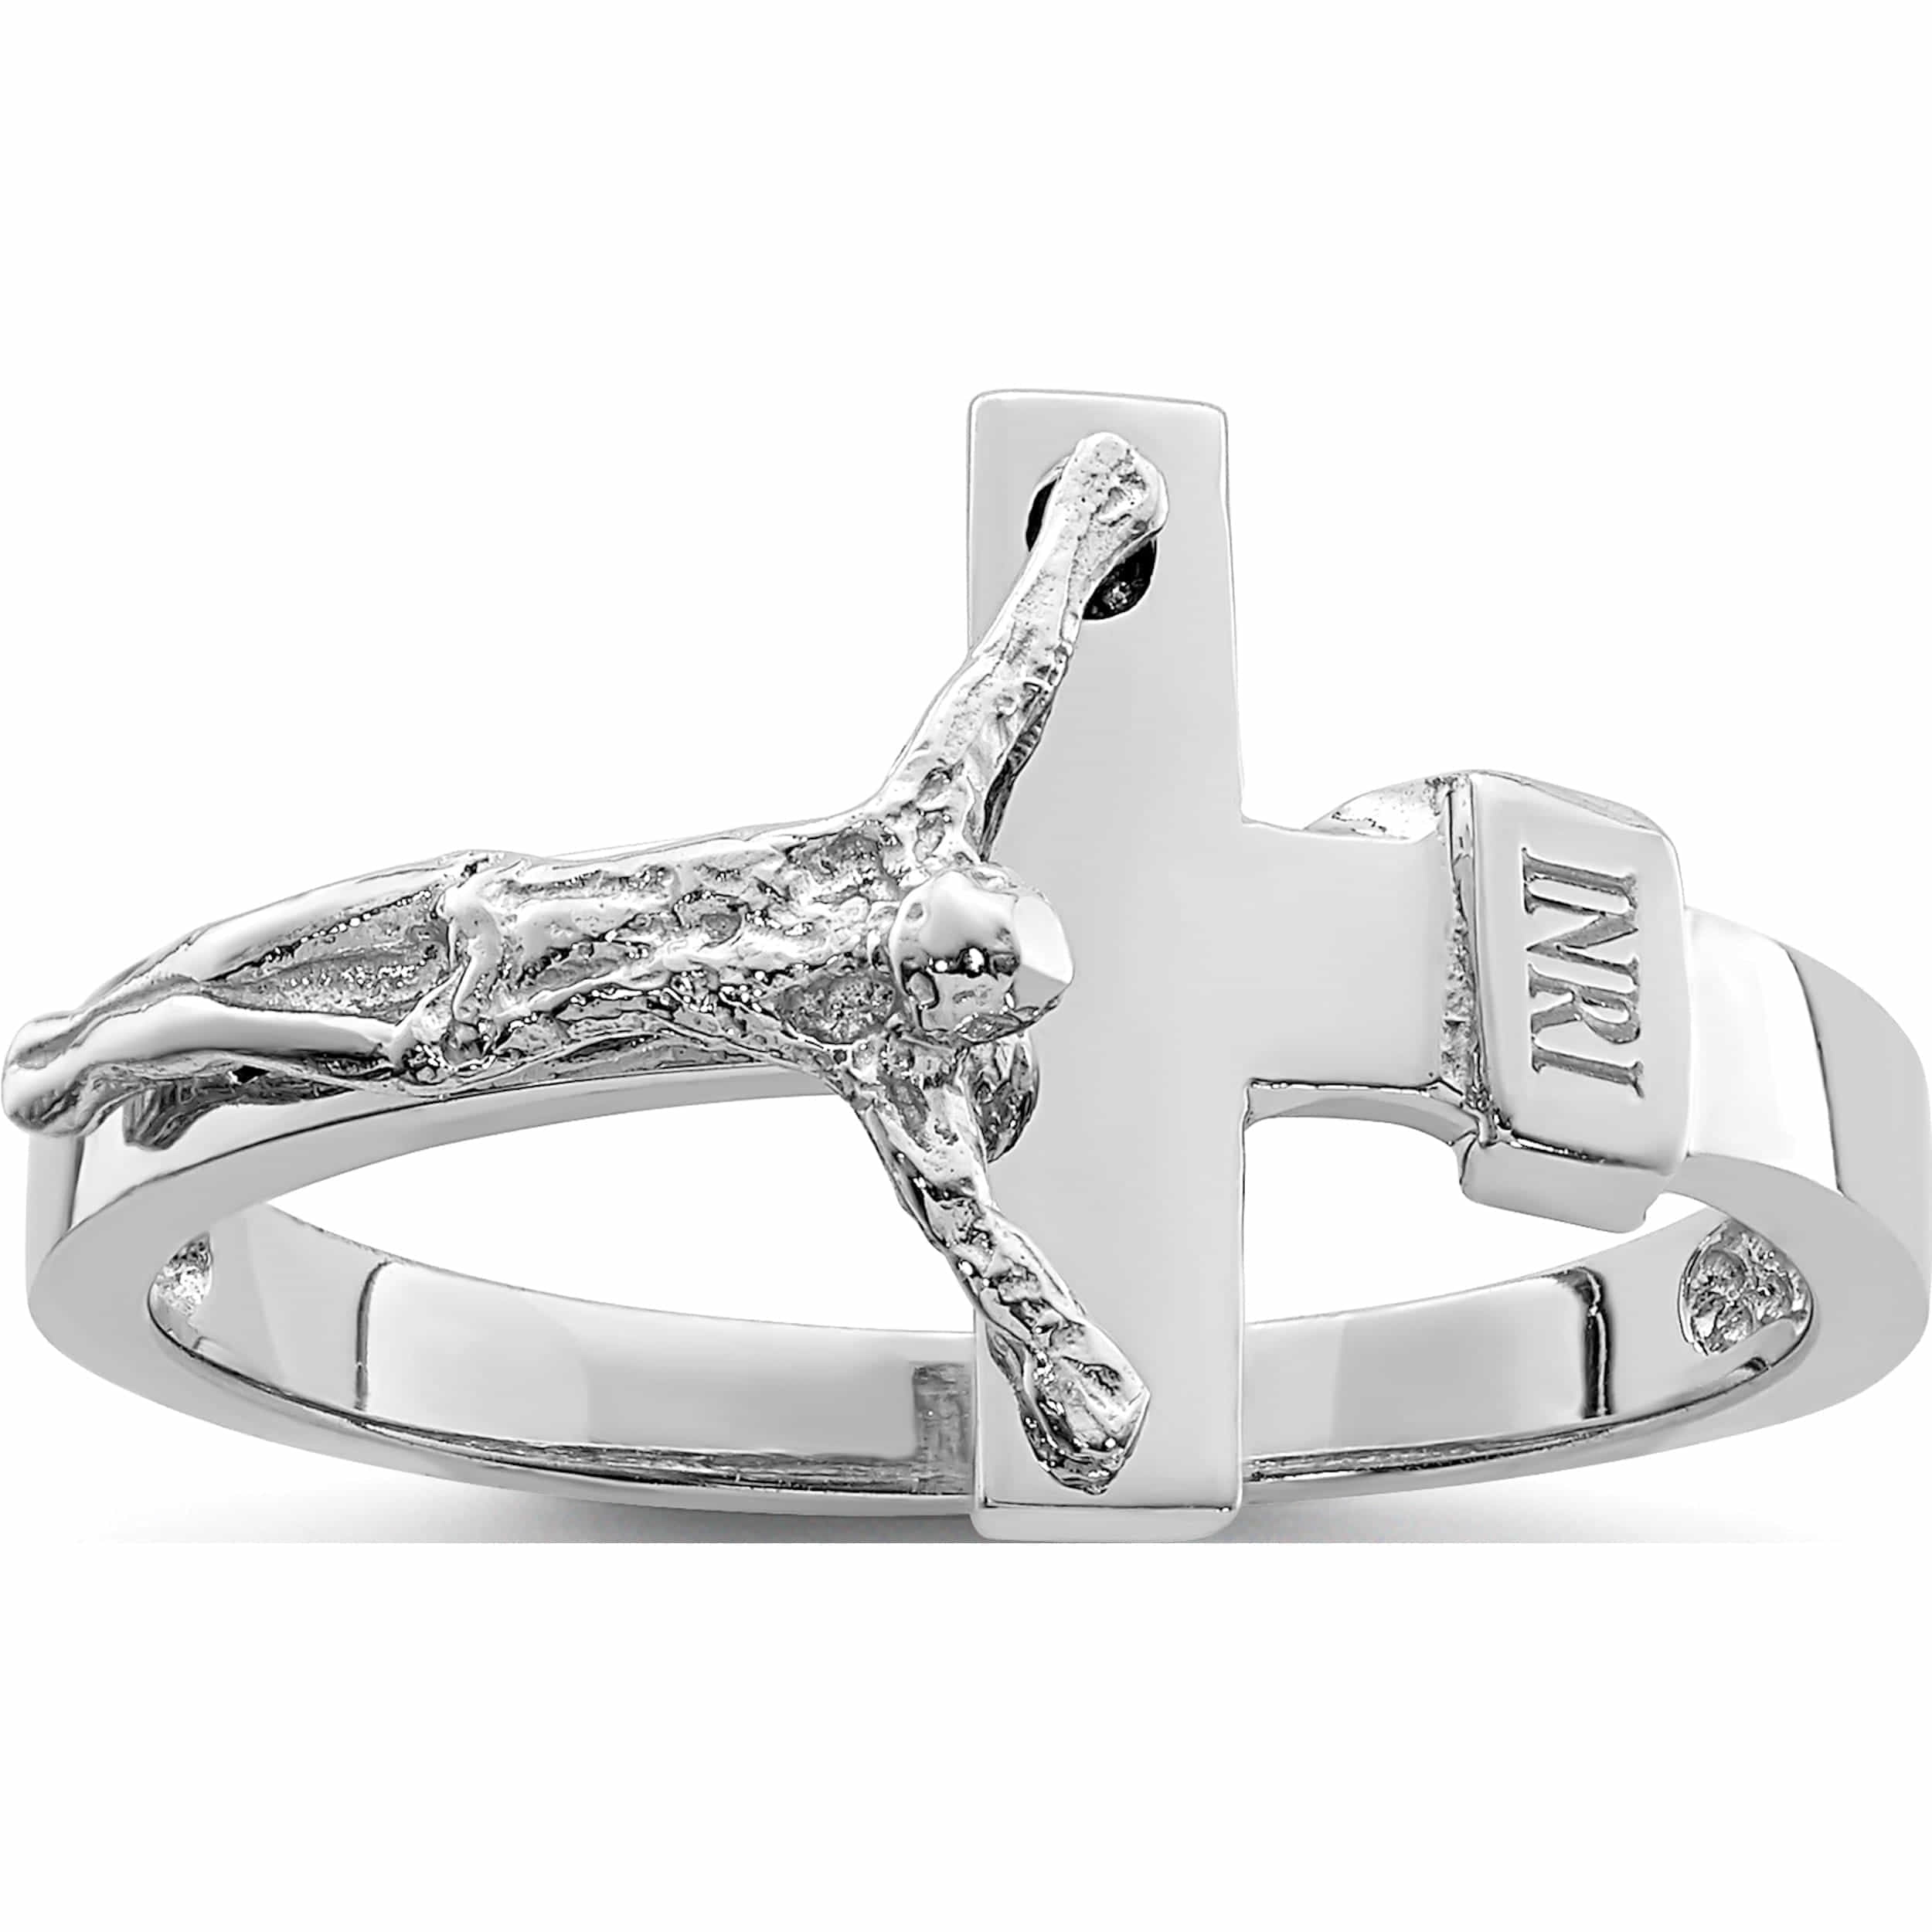 Details about   Real 14kt White Polished INRI Crucifix Ring Size:7 